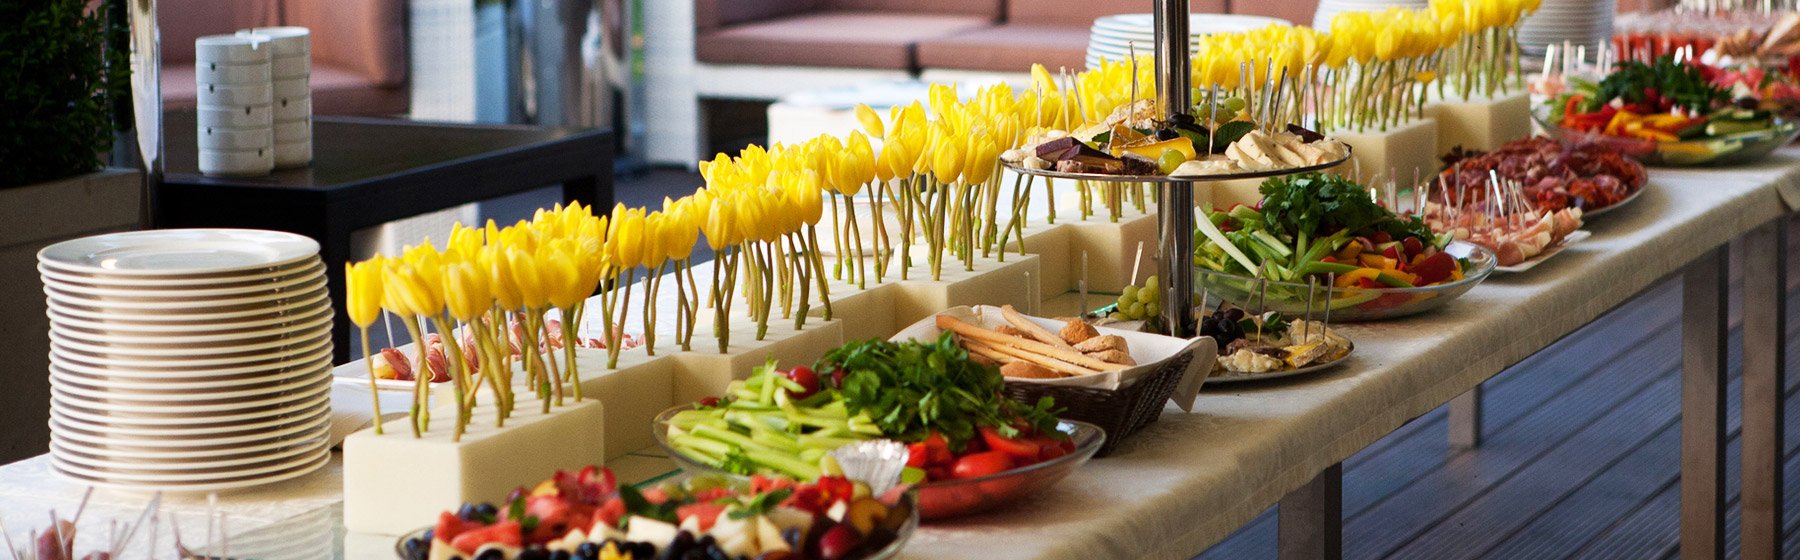 Catering Services at Our Hotel in Atlanta